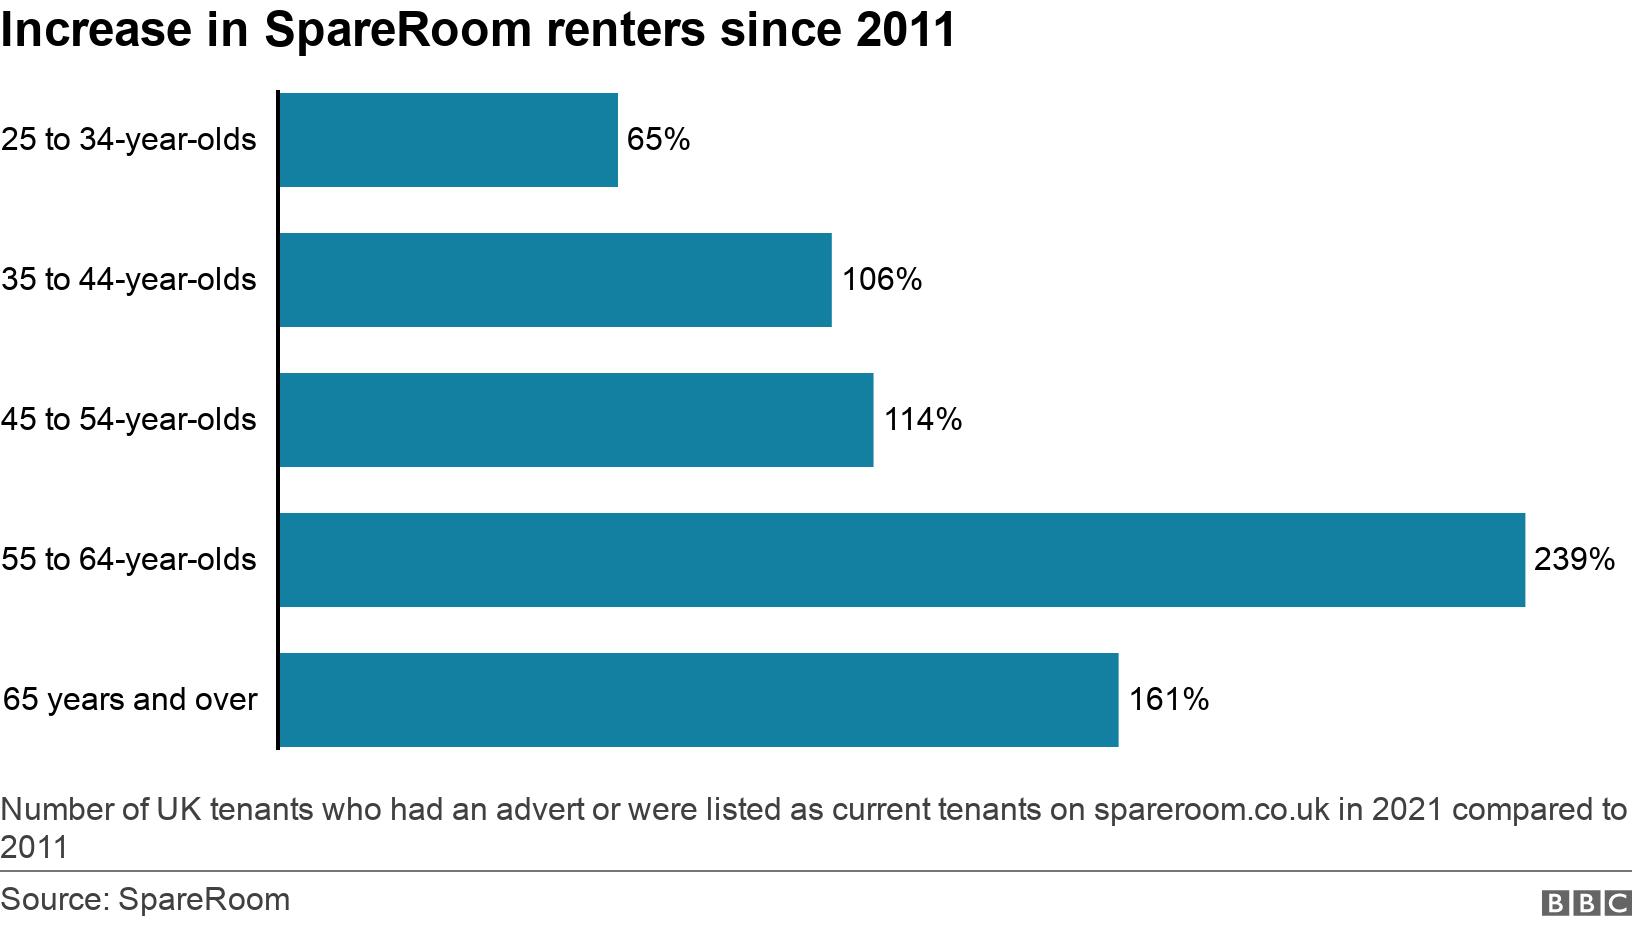 Increase in SpareRoom renters since 2011. . Chart showing the increase in number of tenants on spareroom.co.uk for different age groups Number of UK tenants who had an advert or were listed as current tenants on spareroom.co.uk in 2021 compared to 2011.